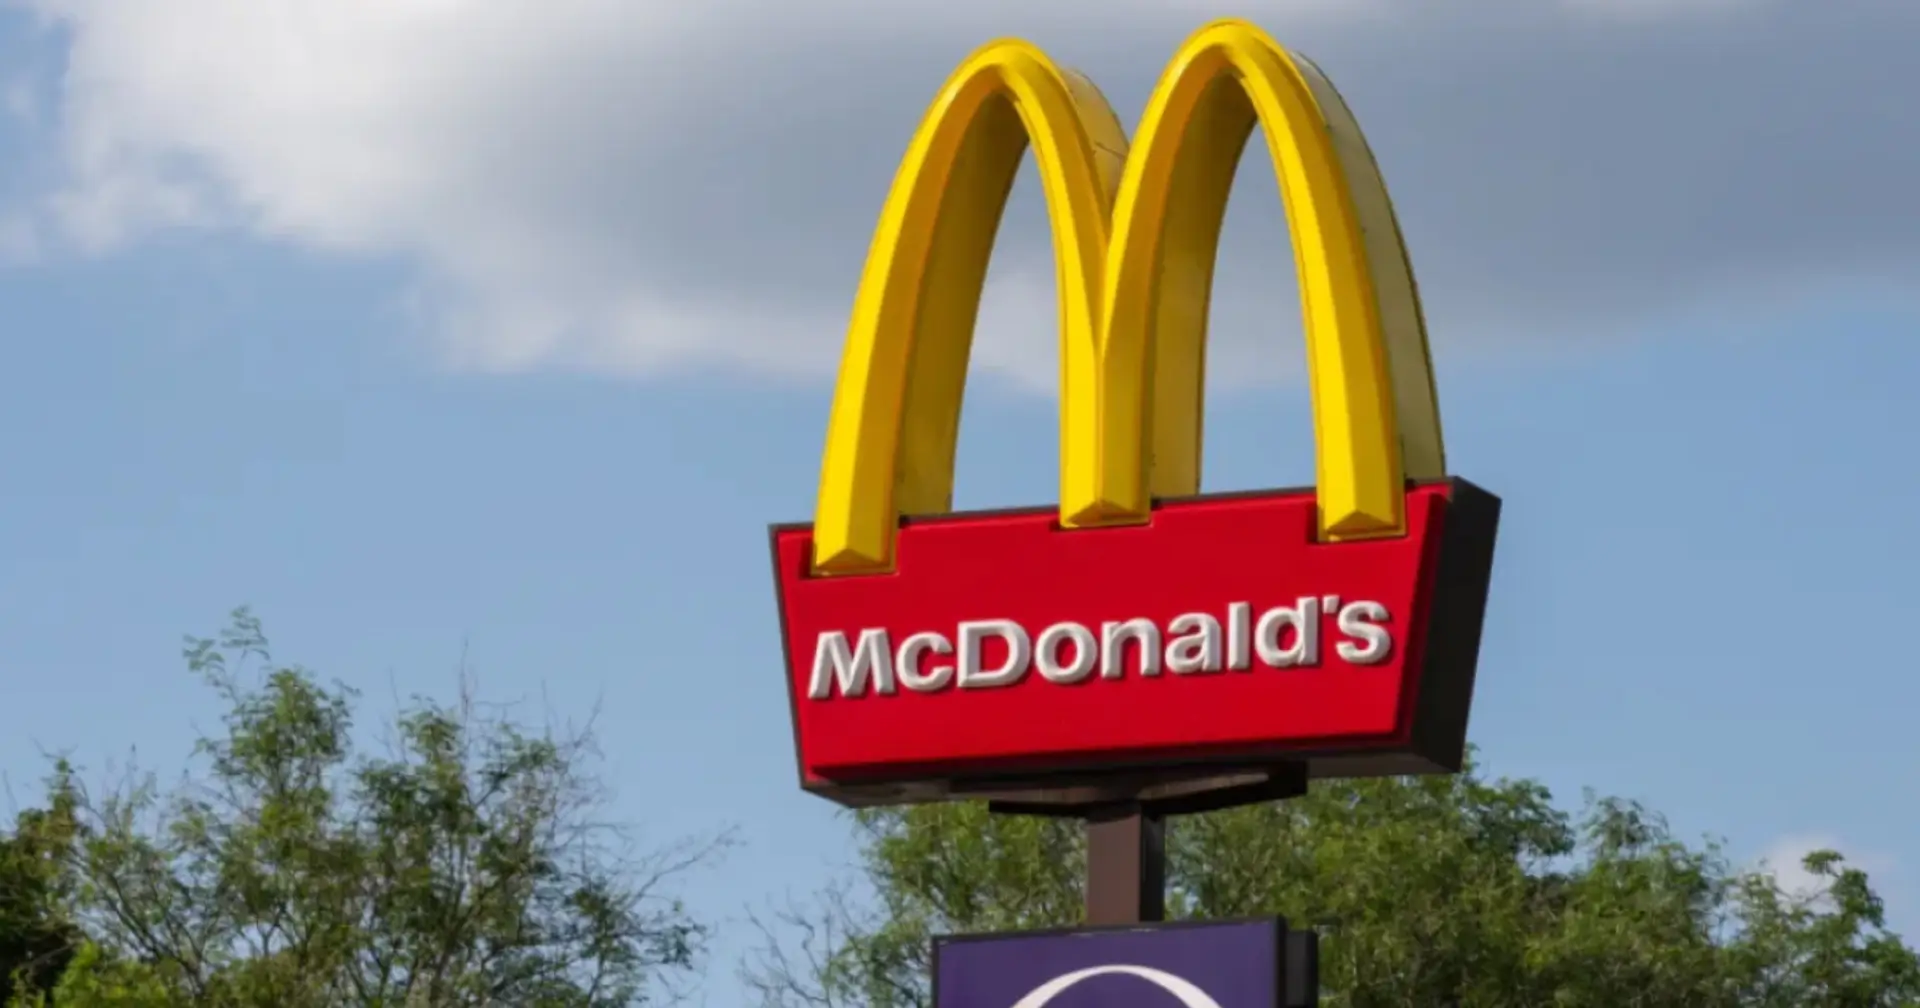 Top 5 league set to be renamed after McDonald’s